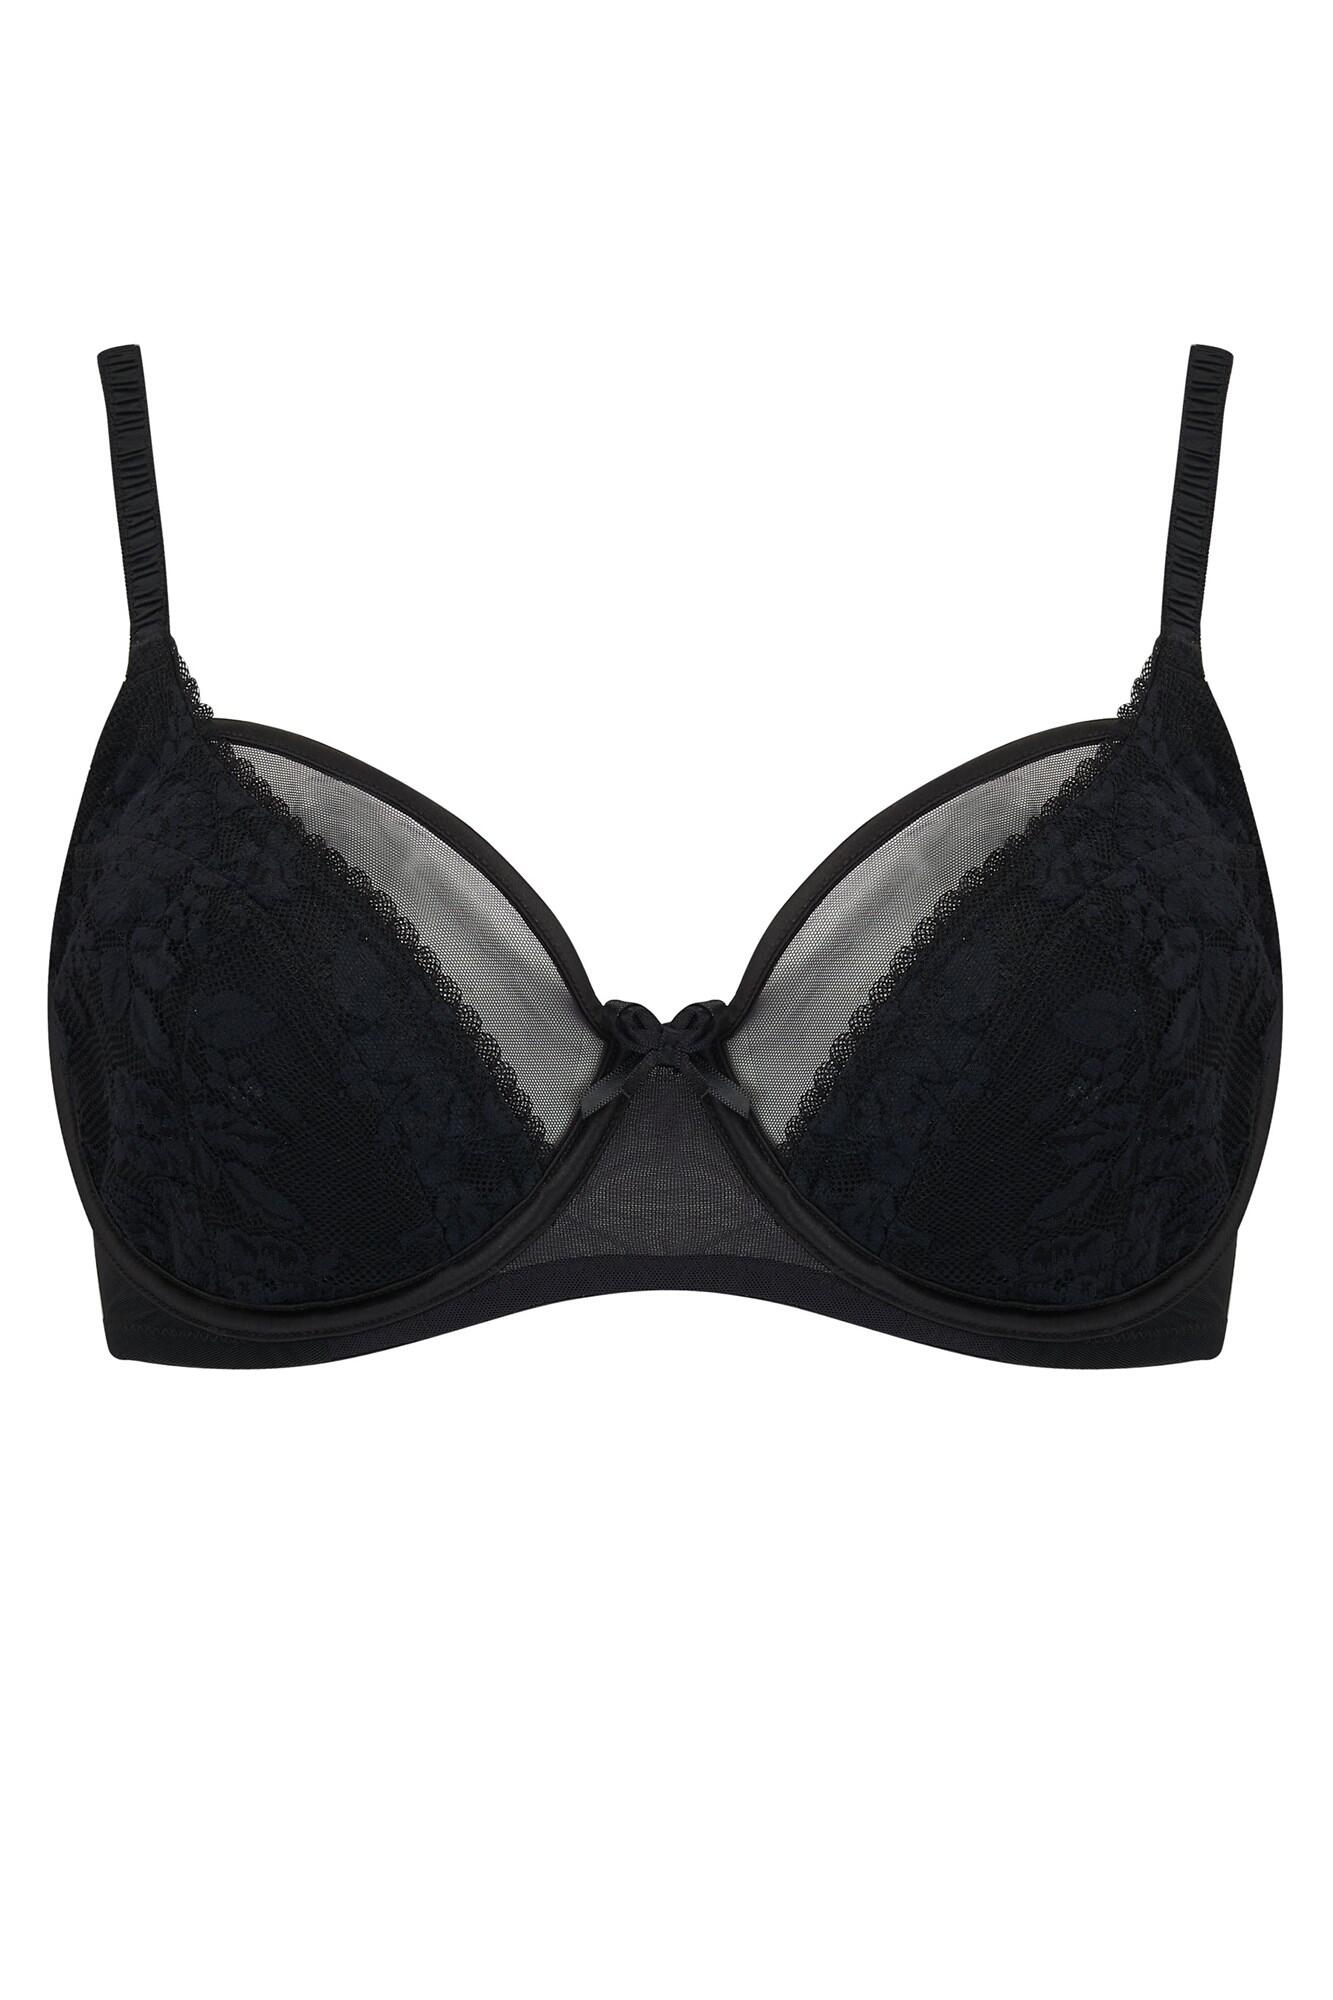 Muse Underwired Bra | Pour Moi | Muse Underwired Bra | Black | Pour Moi